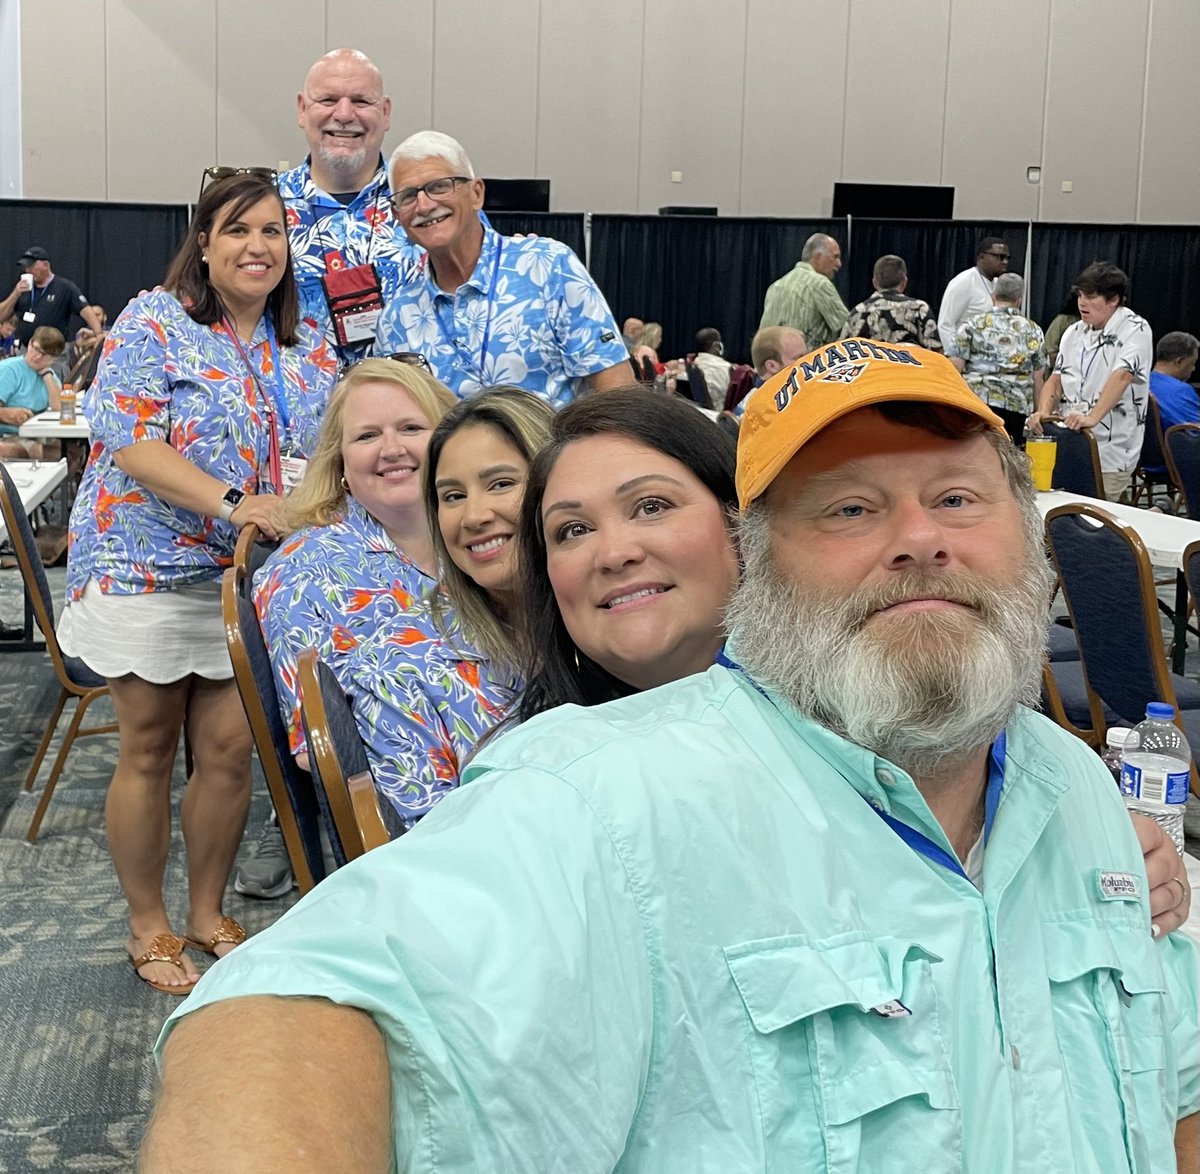 @BOECullmanCity is represented on Tropical Day at the 24th Annual Safe Schools Conference. School safety is their top priority. @revelspamela @sullysro @AlabamaAchieves @cullmanprimary @cullmanpd @CullmanUSA @EESPrincipal